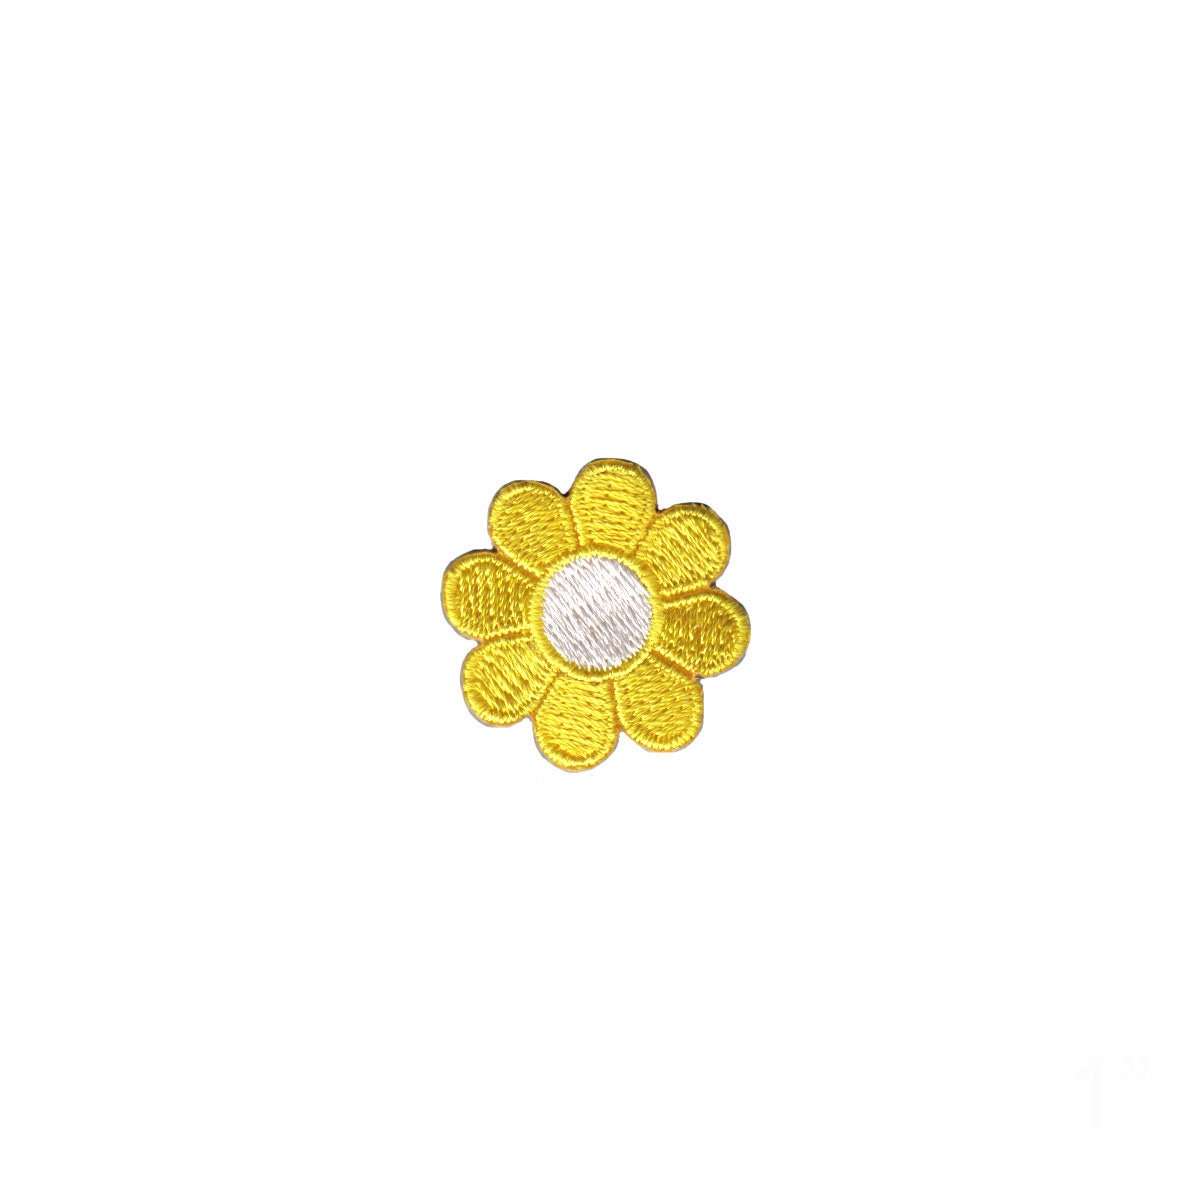 1 Inch Daisy Yellow Petals White Center Patch Flower Embroidered Iron On 